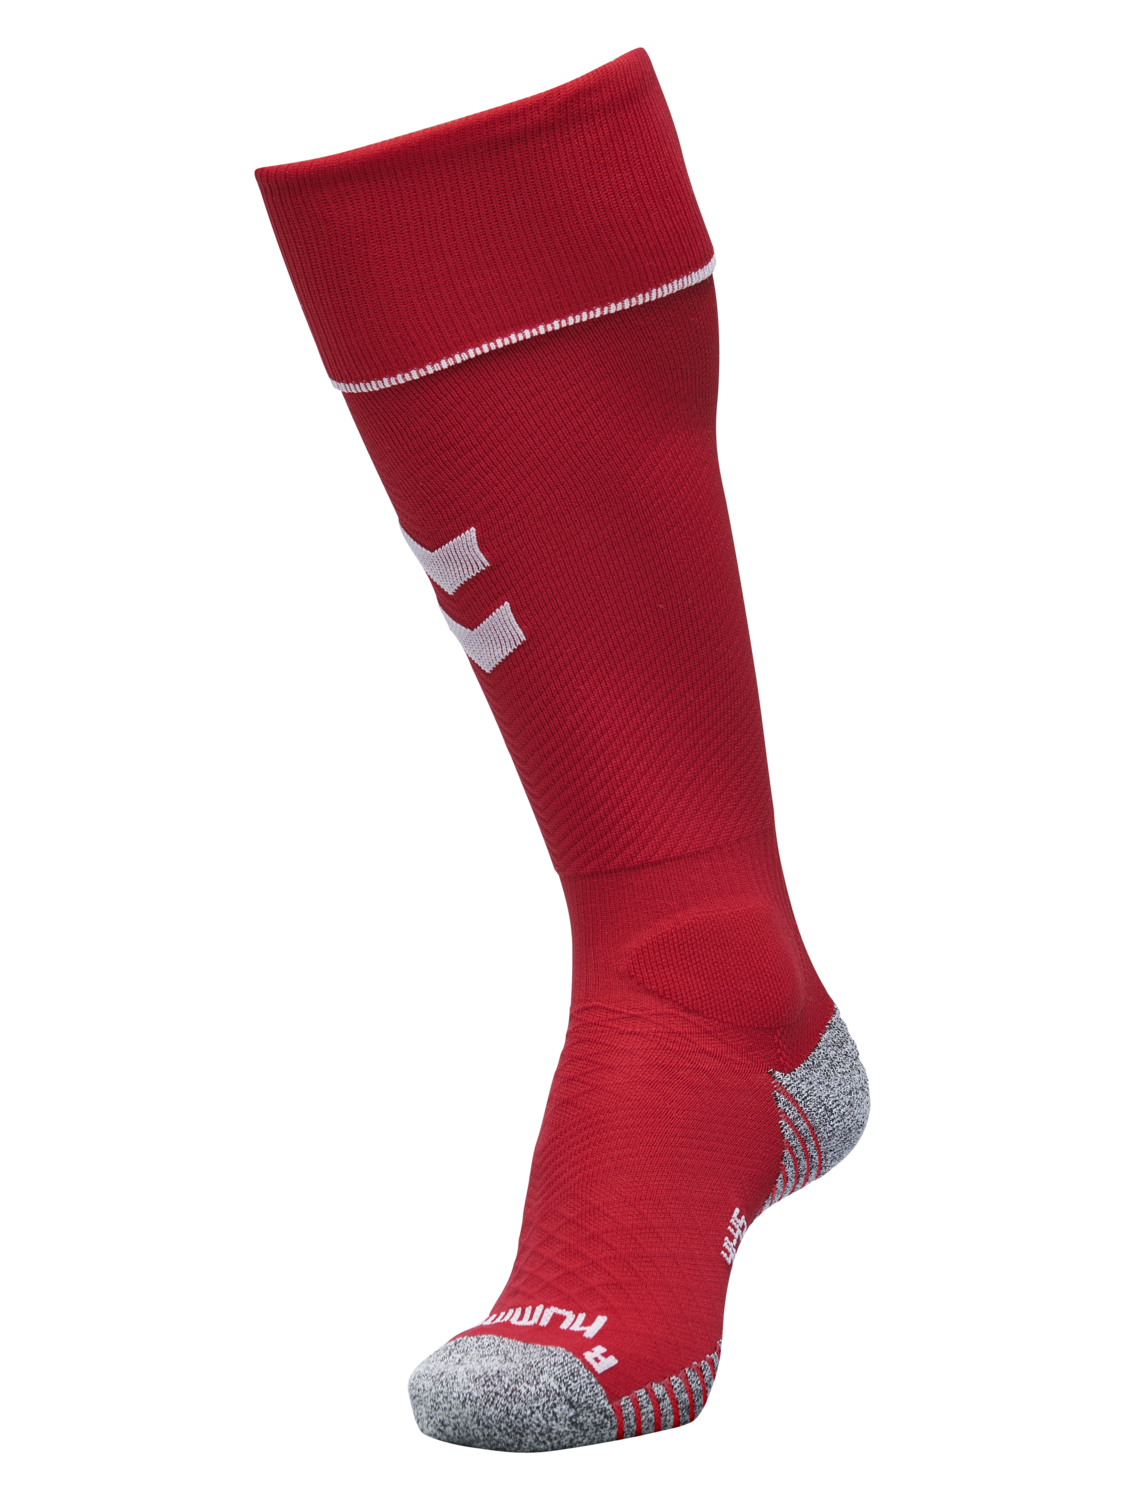 Details about   Hummel Football Soccer Sports Mens Pro Socks Red White 